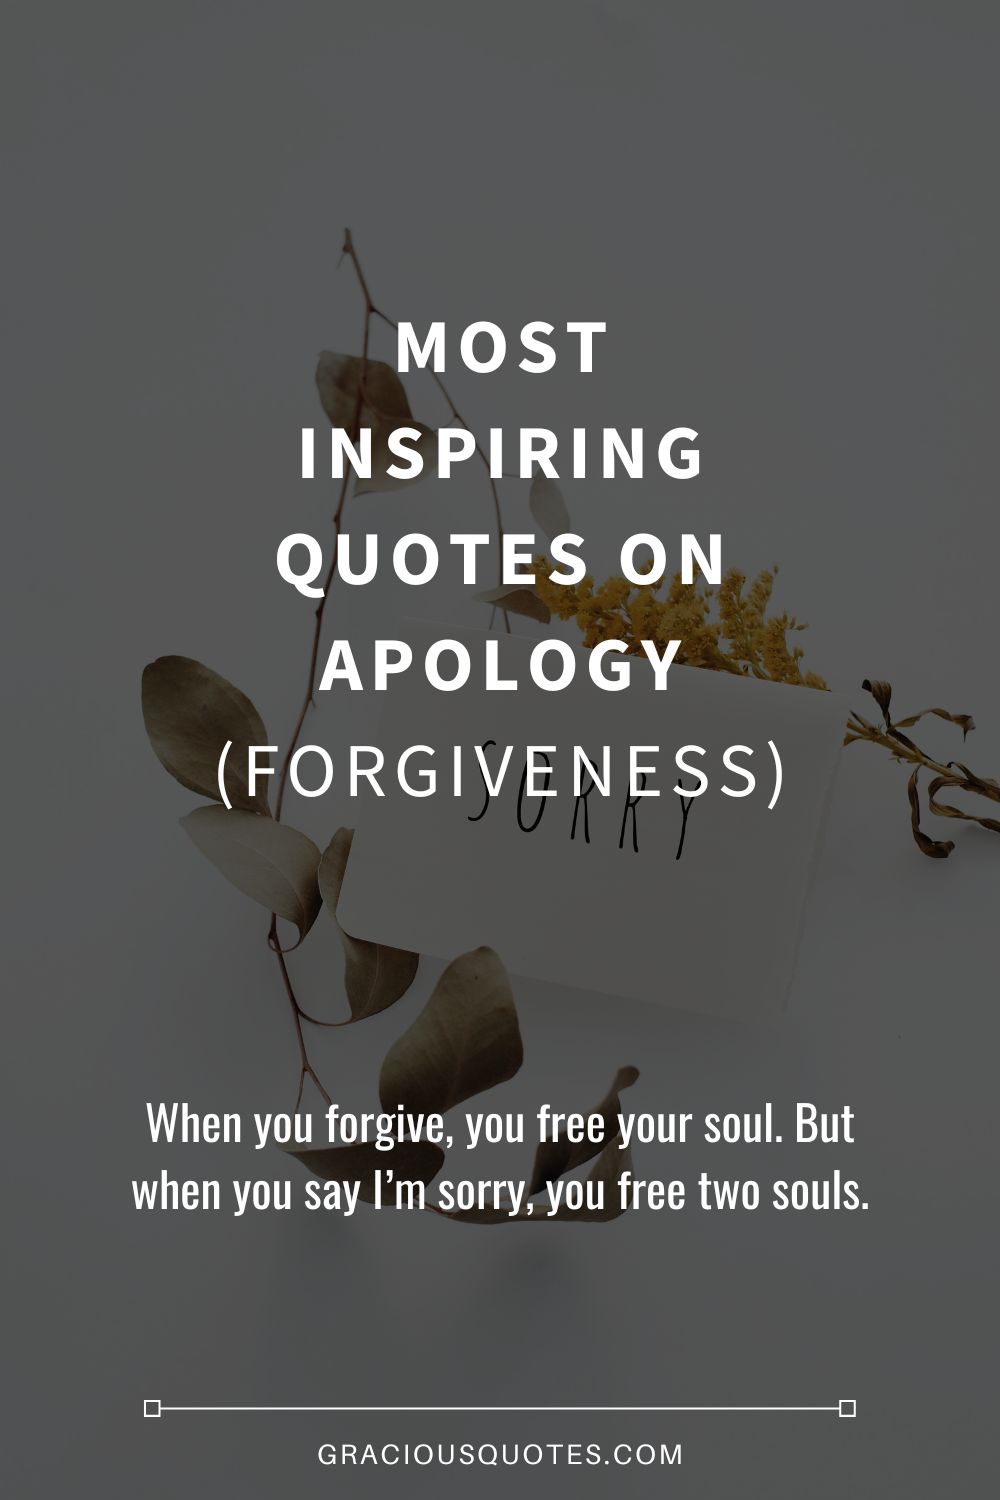 Most Inspiring Quotes on Apology (FORGIVENESS) - Gracious Quotes